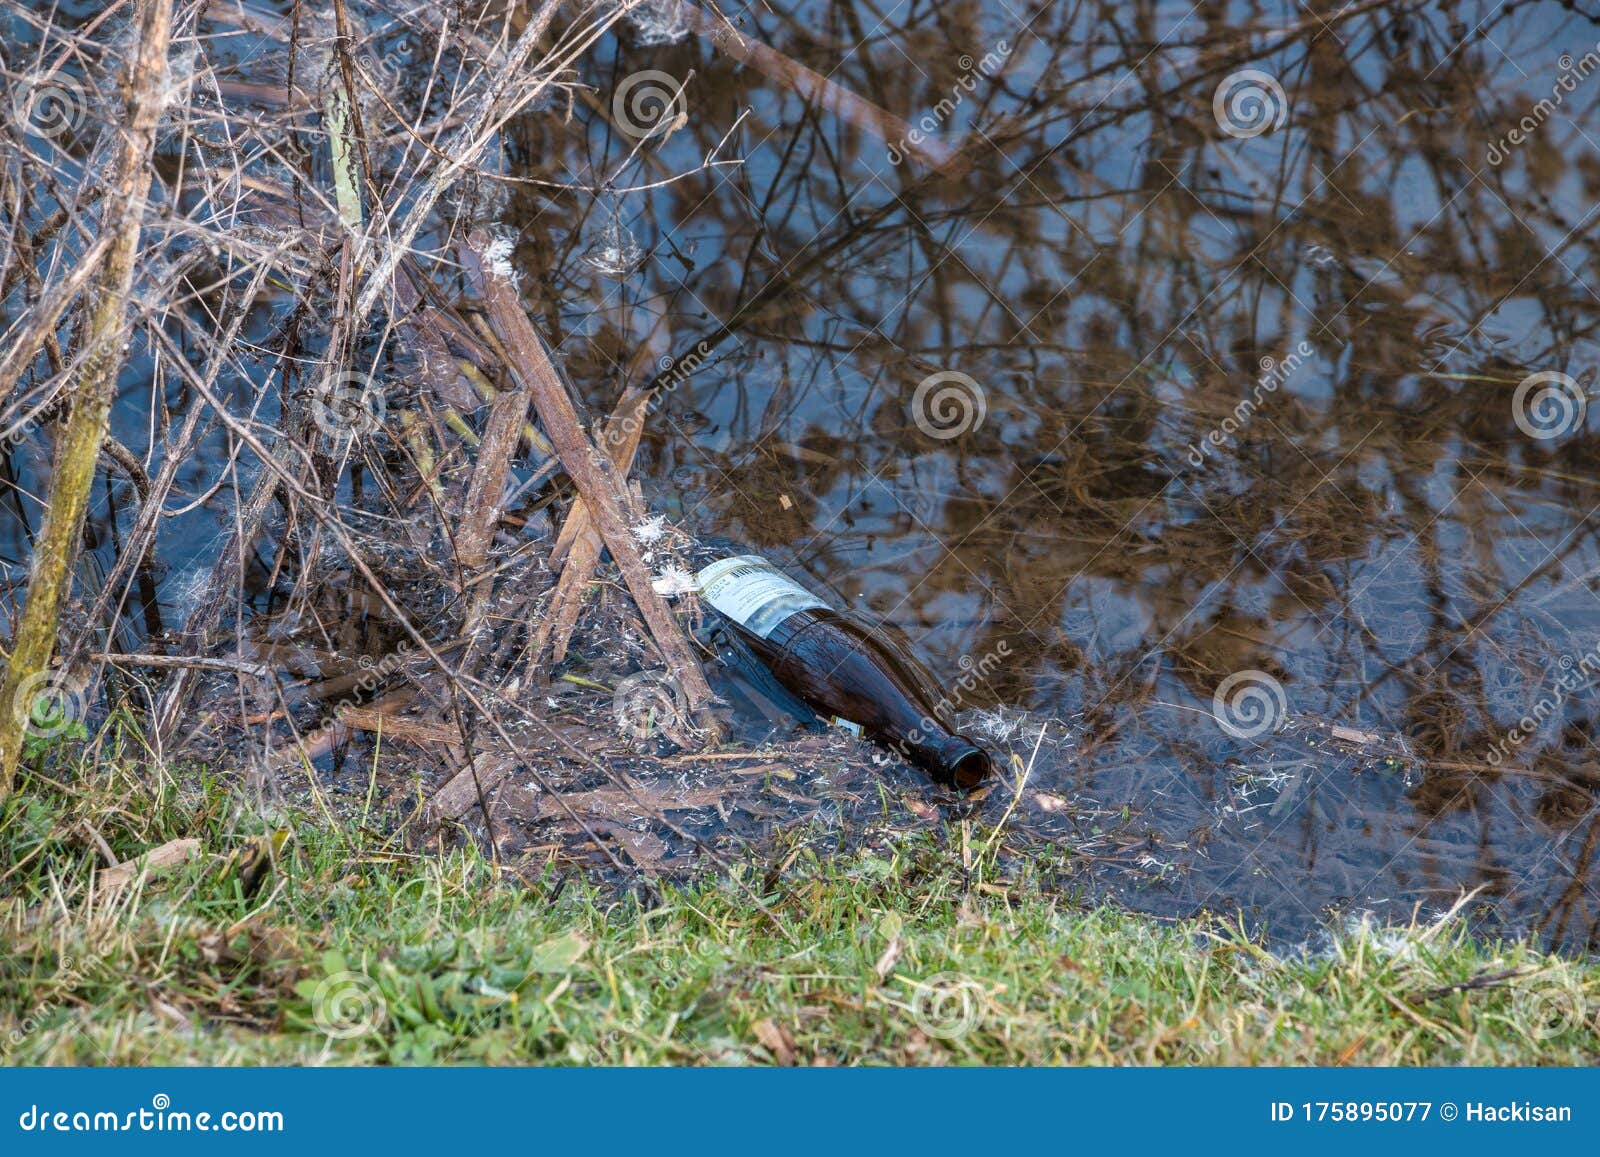 illegal and disrespectful waste disposal of a beer bottle made of brown glass